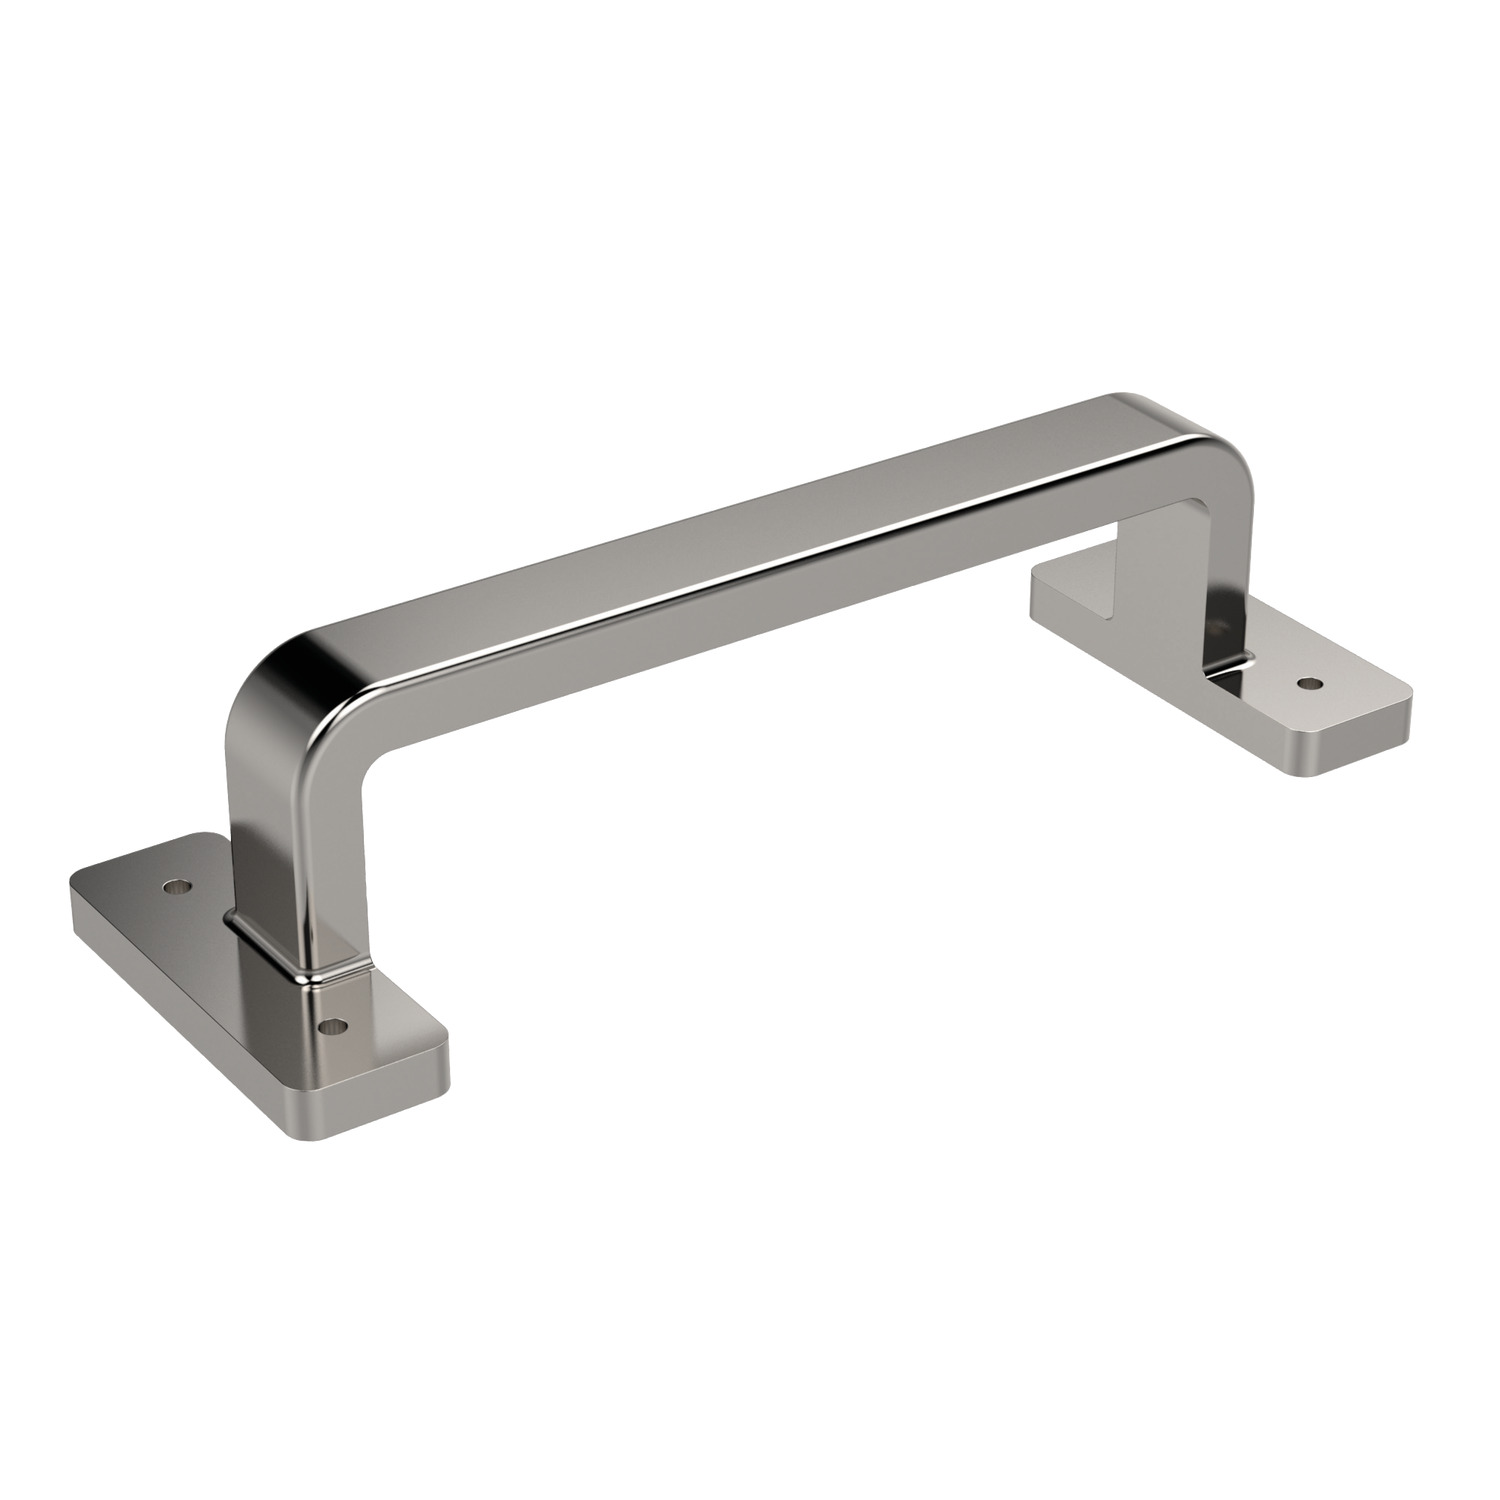 Pull Handles, Stainless Steel AISI 316 stainless steel for harsh and corrosive environments. Higher profile allows for easy gripping with gloved hand.